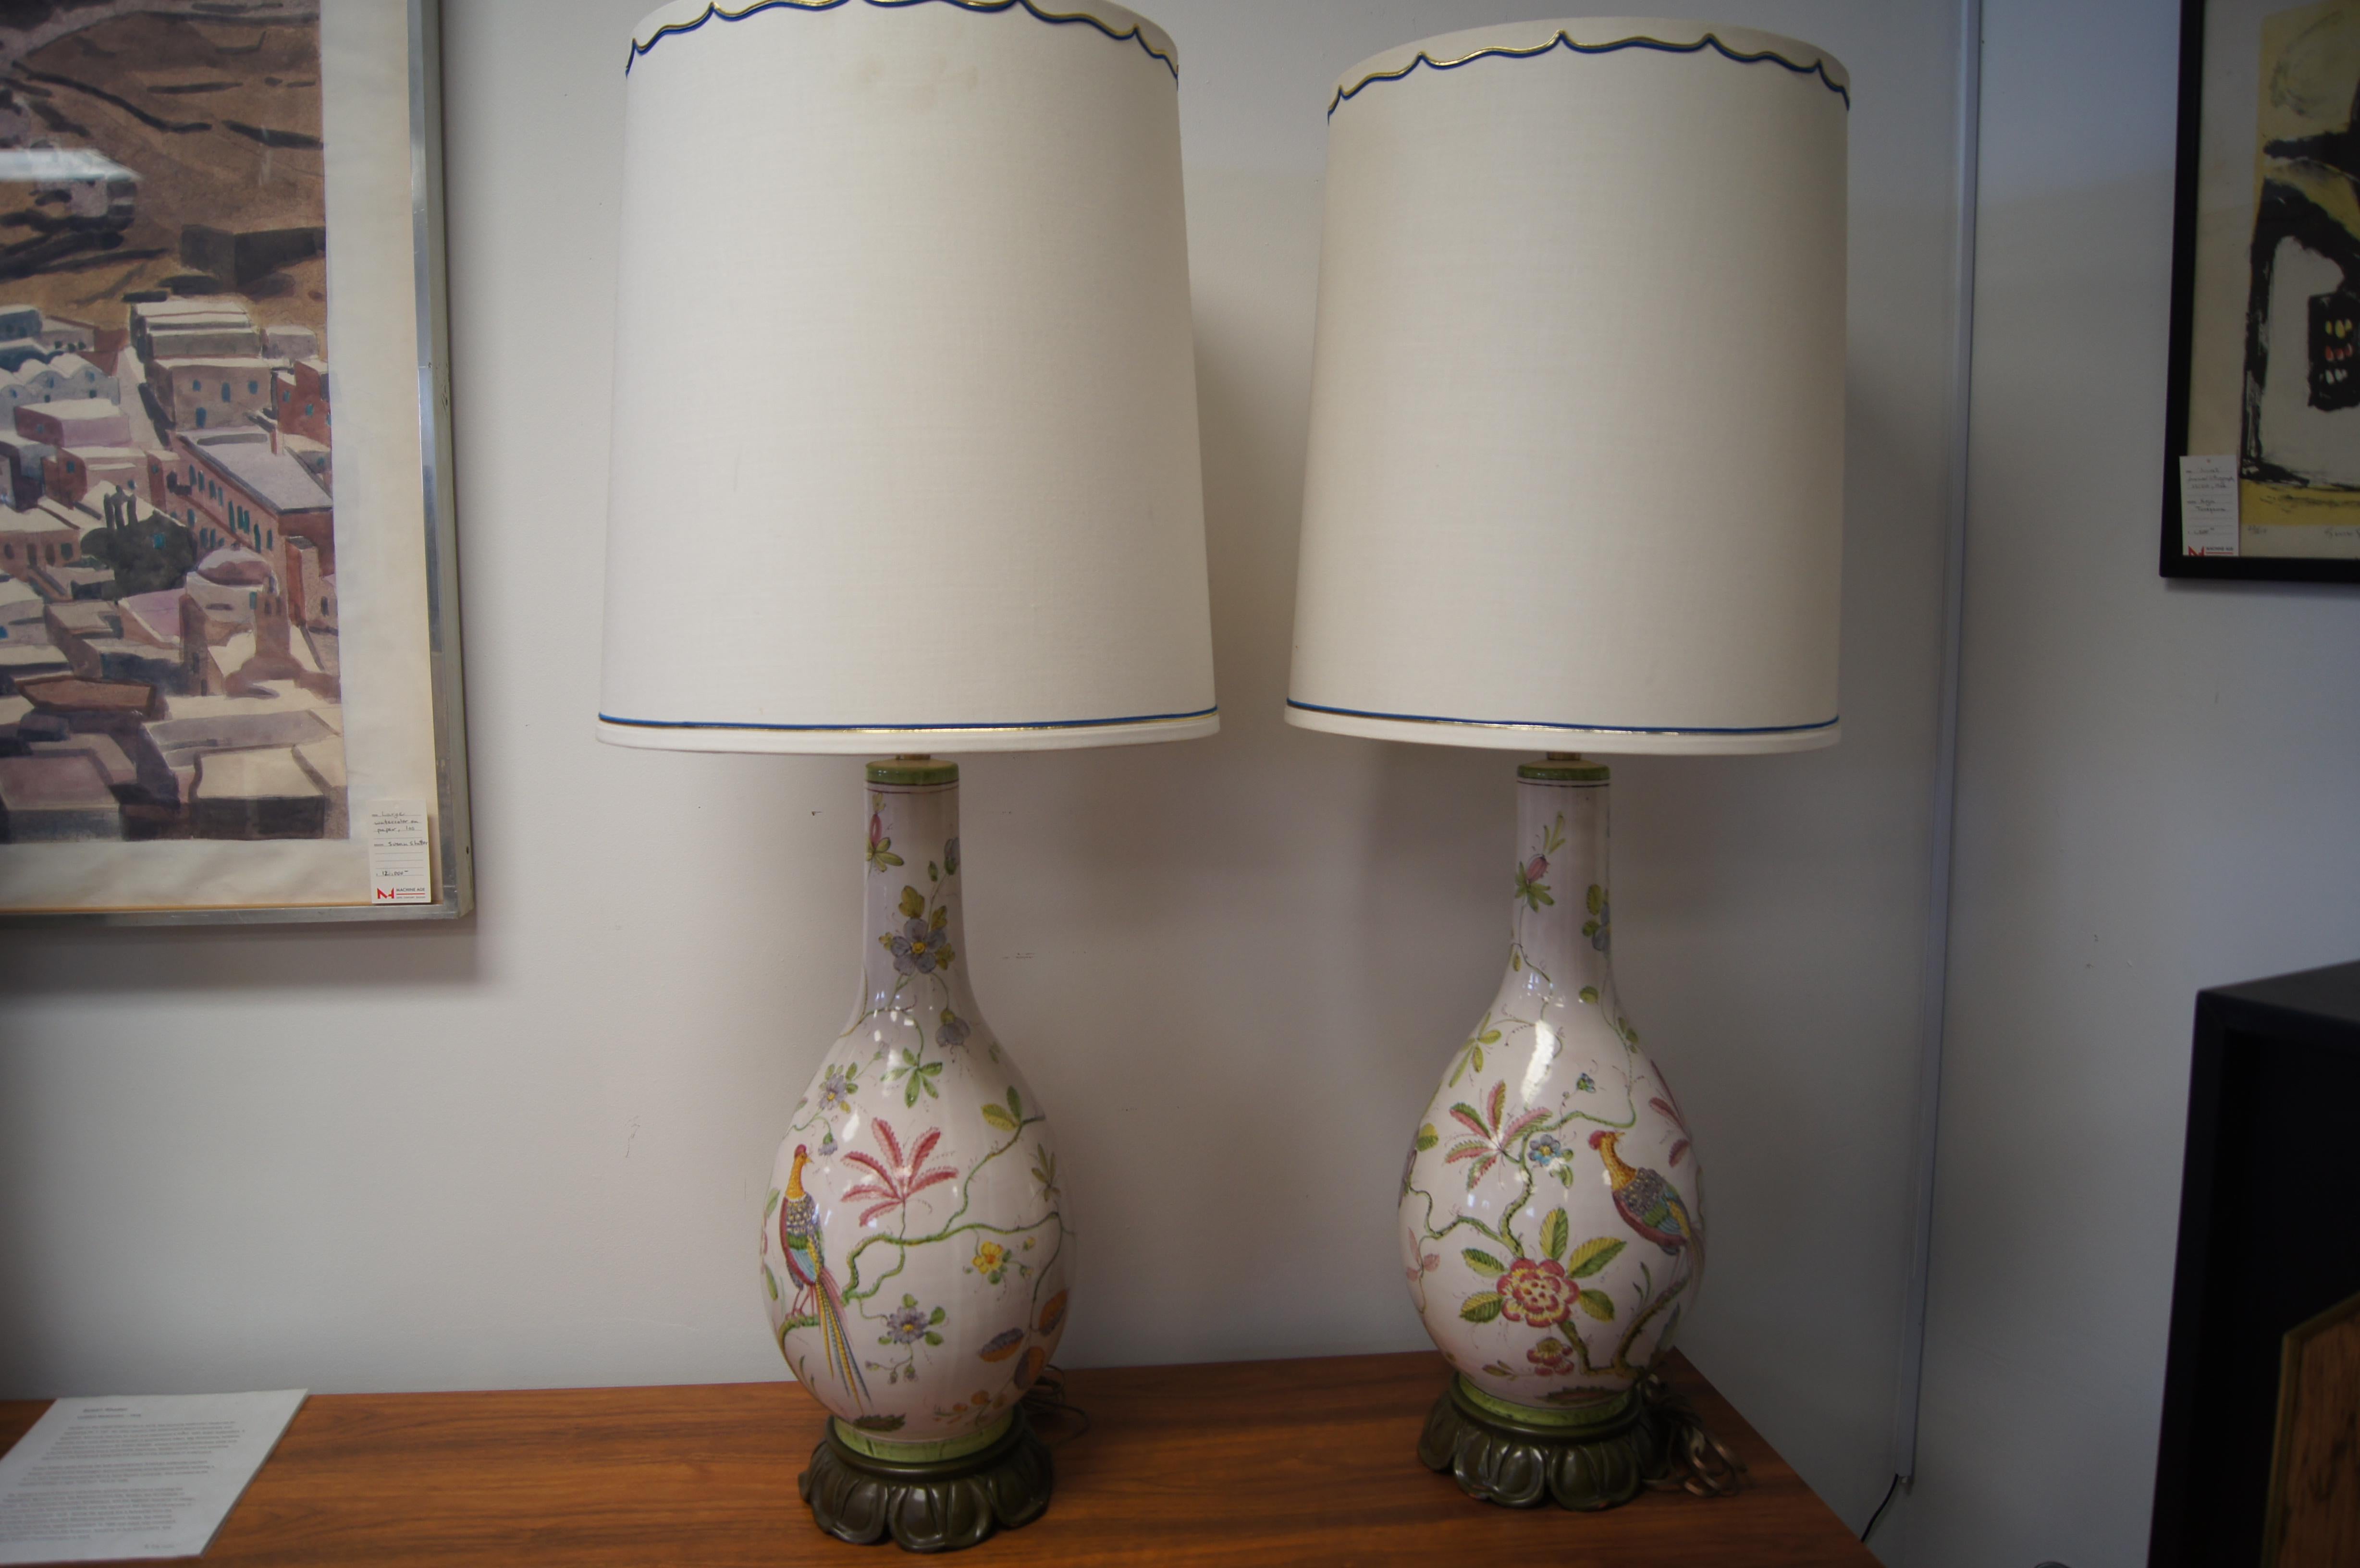 This pair of table lamps by Marbro depicts pheasants among flora in a lovely mélange of reds, blues, greens, lavenders, yellows on a cream ground. The long tapering porcelain body sits on a carved and patinated wooden base.

Listed as model no.